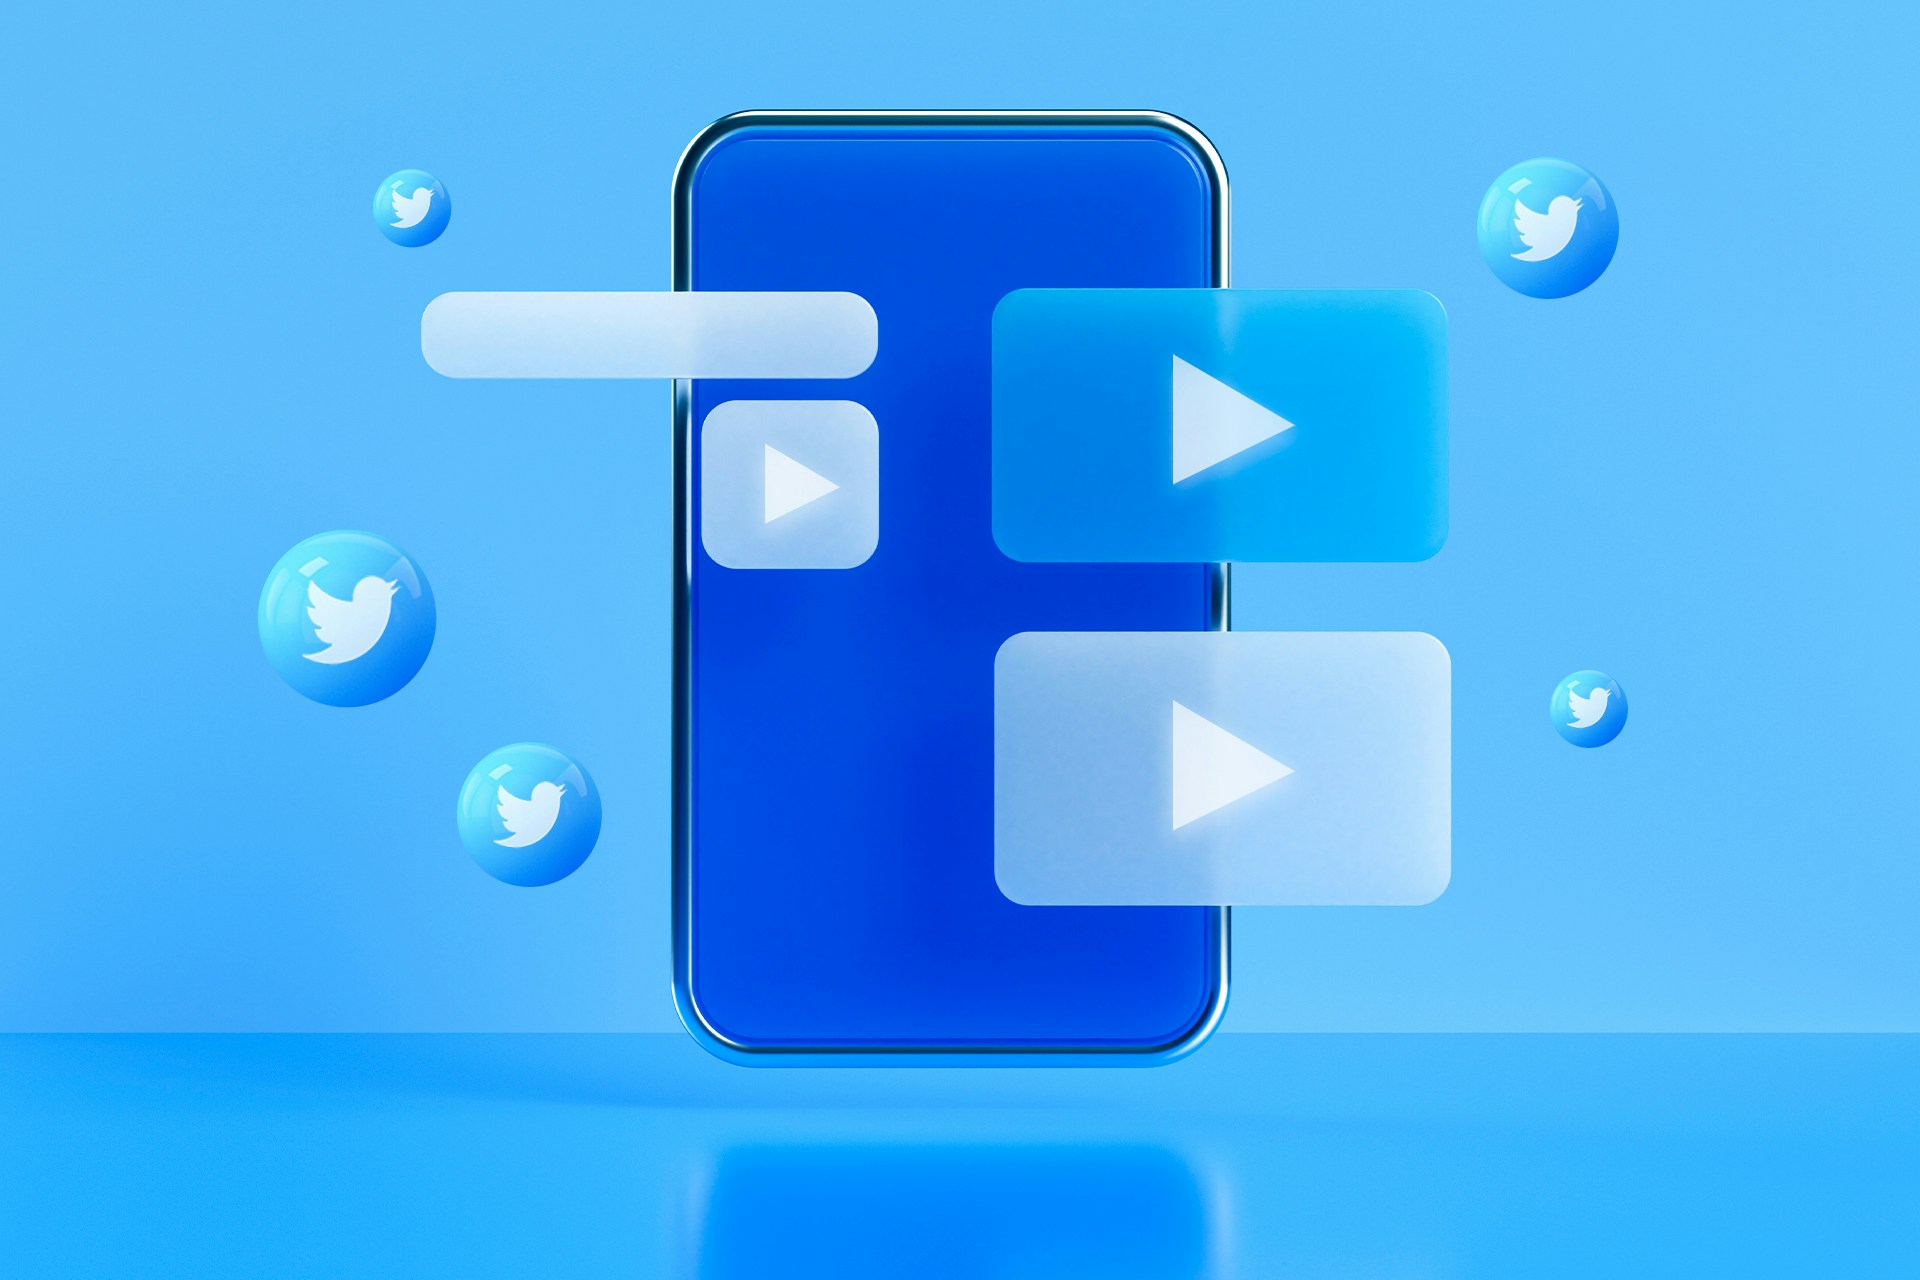 3D Illustration of a phone and Twitter icons to showcase how to post videos on Twitter/X